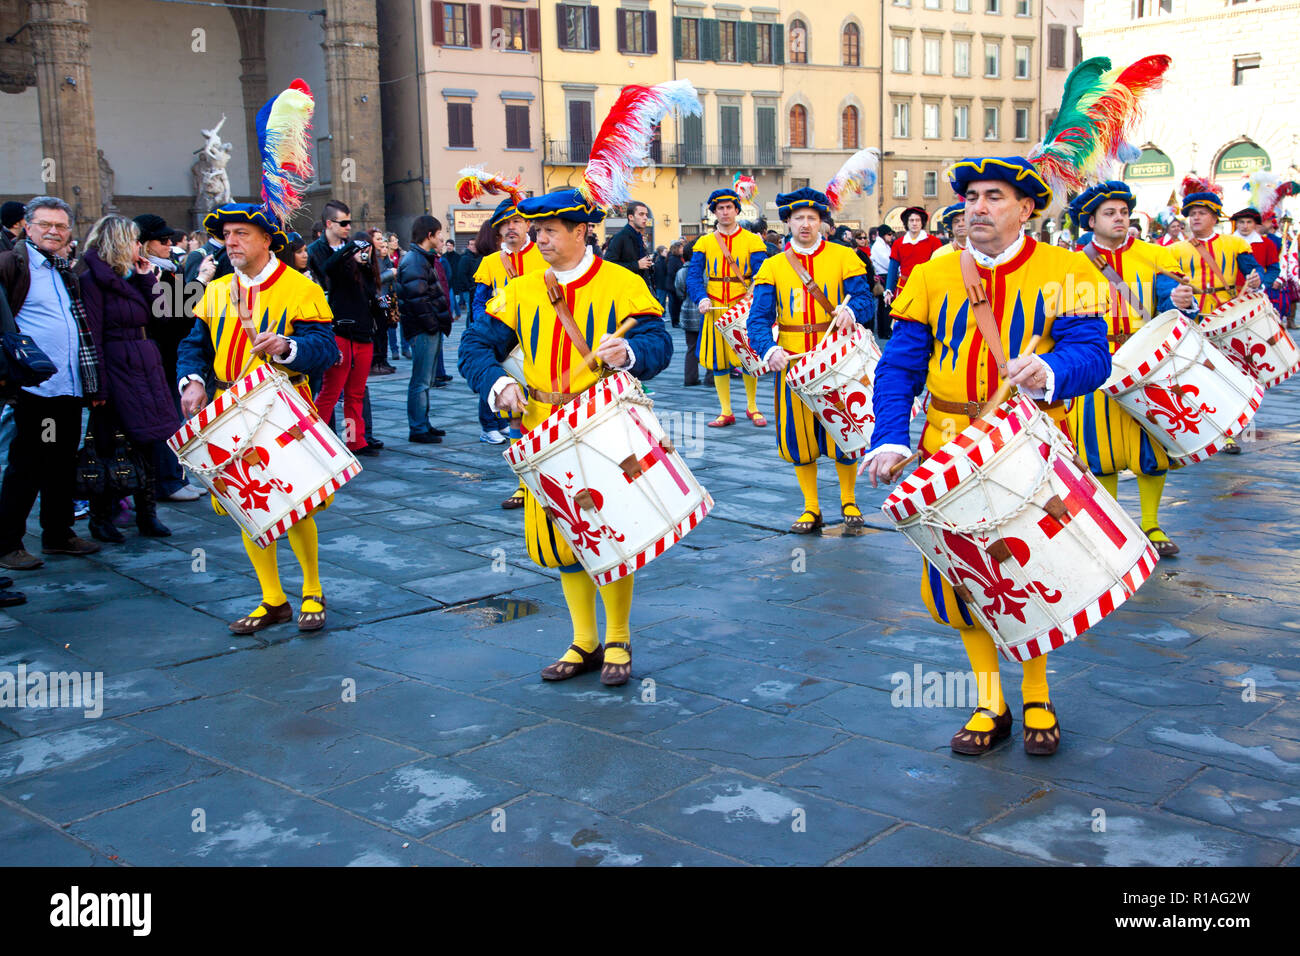 Parade by men in traditional costume through the streets of Florence Italy. Stock Photo